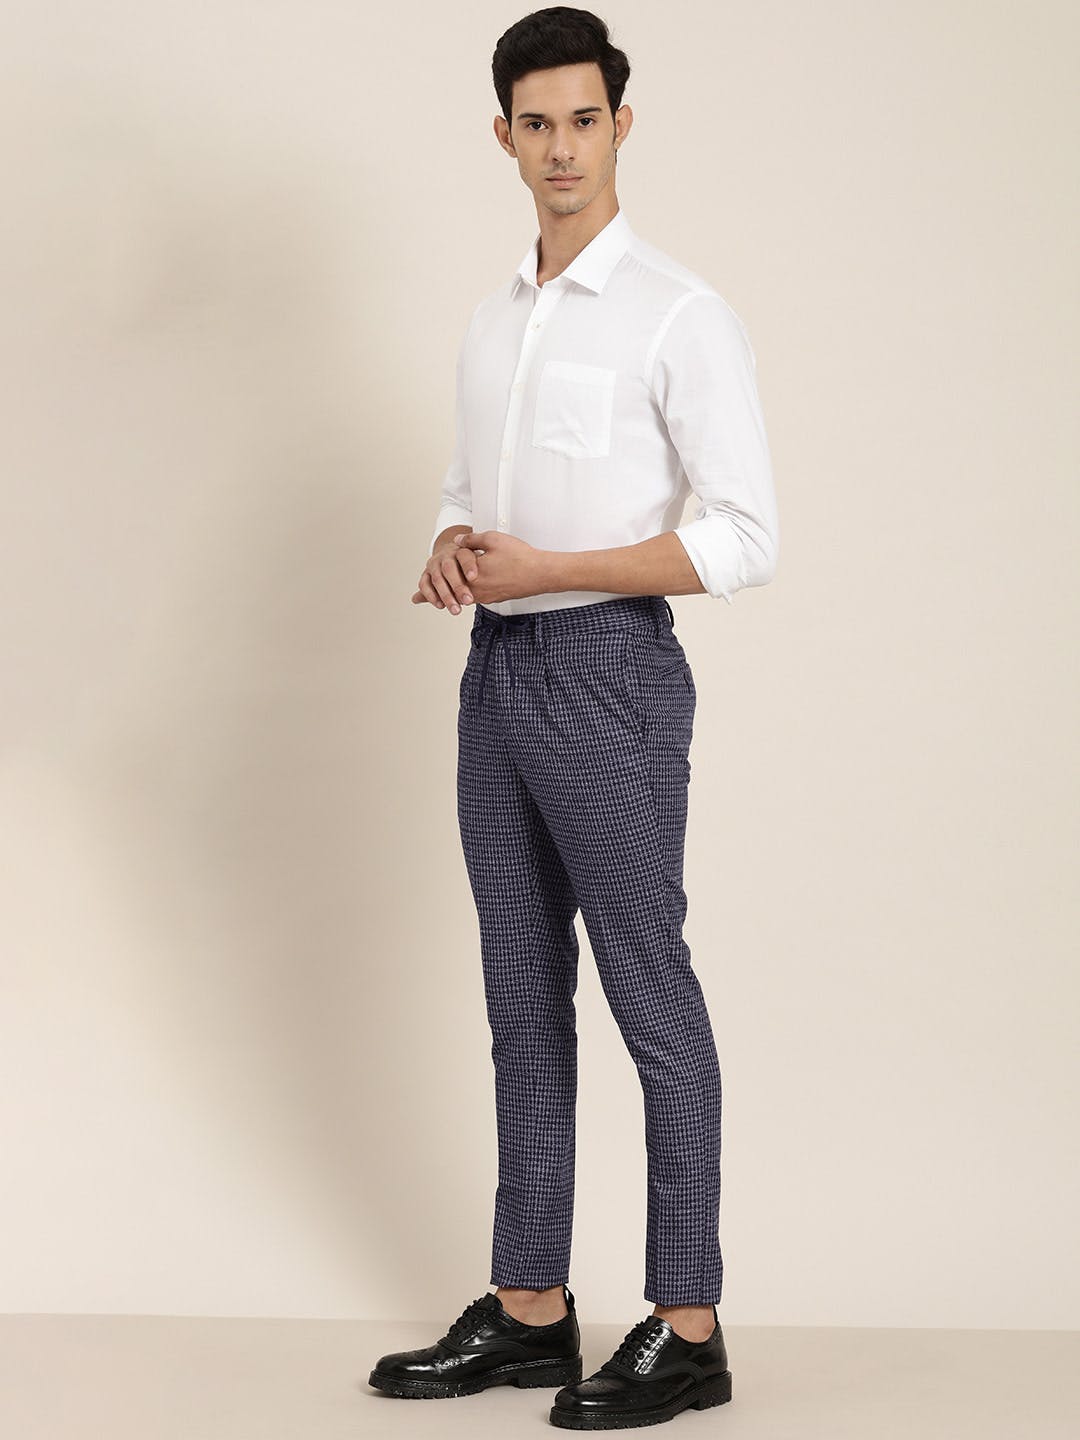 Shop Men's Trousers Online From Invictus